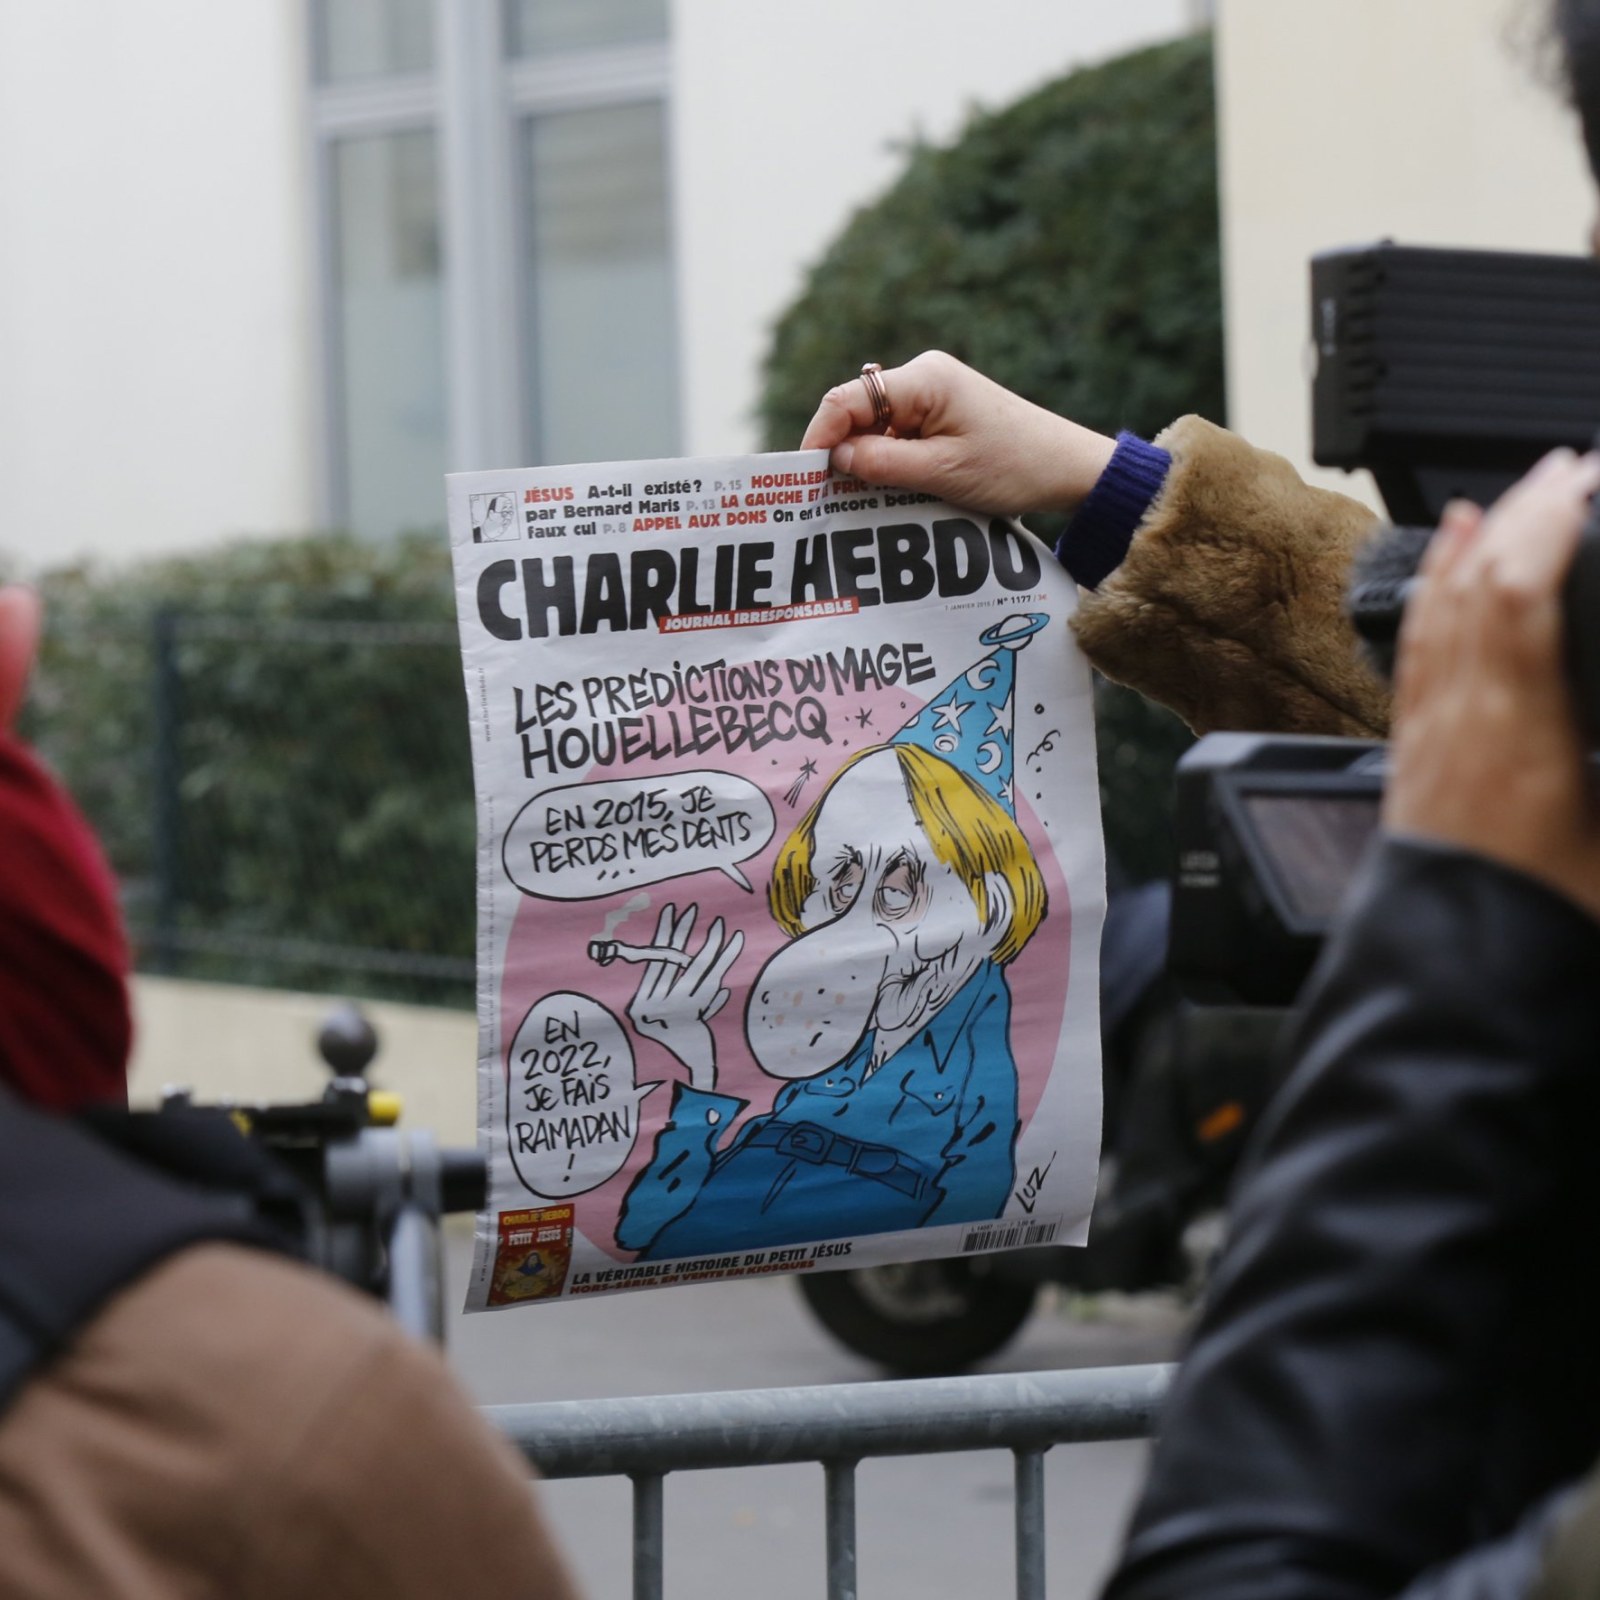 Four Victims of Charlie Hebdo Attack Identified